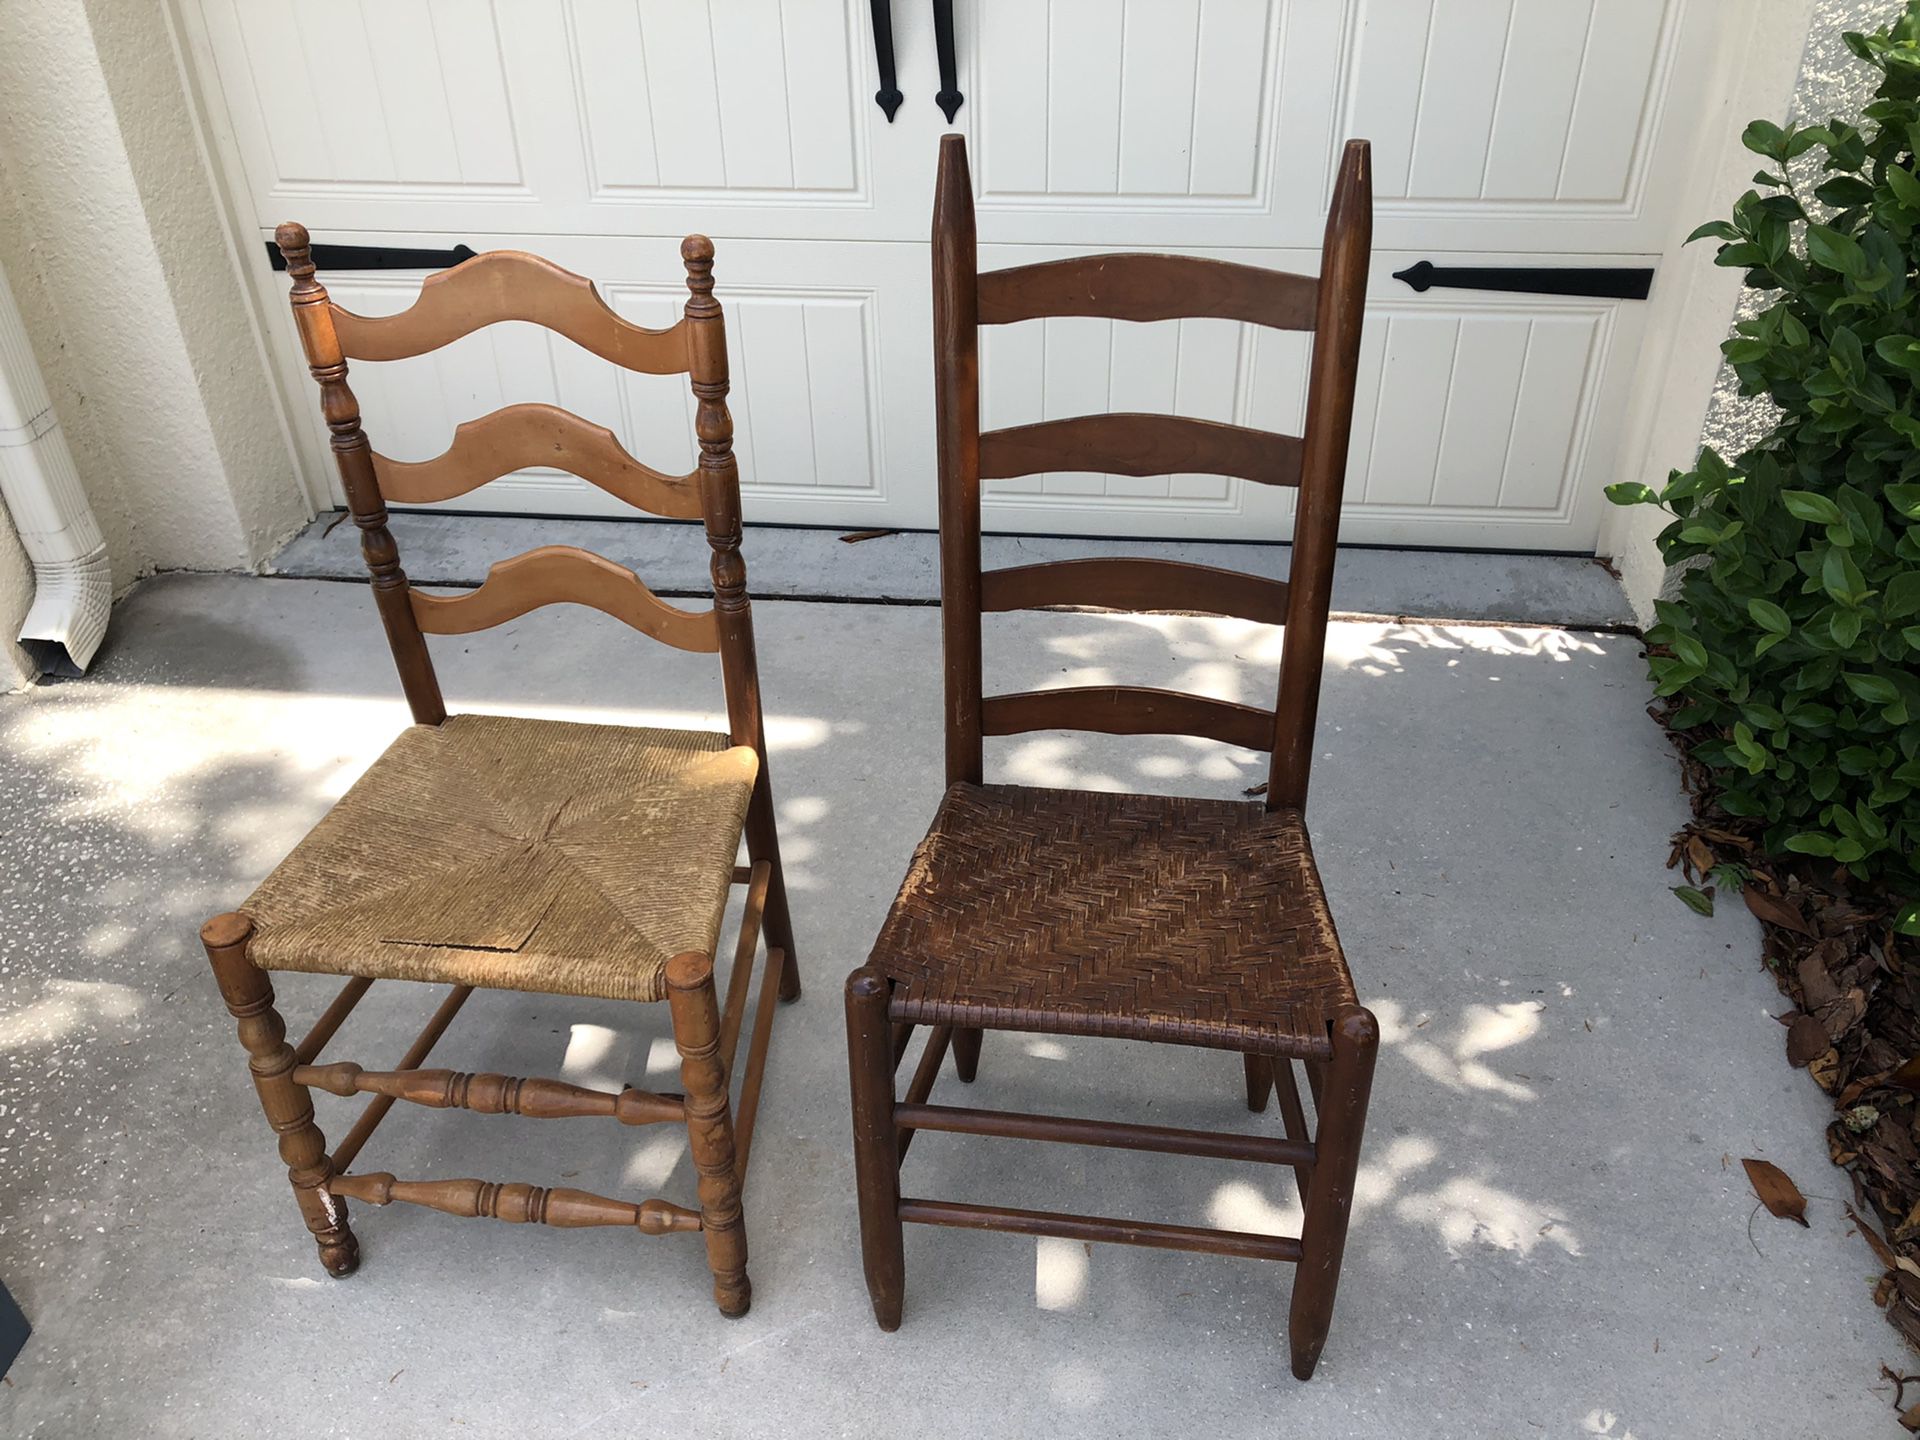 Antique ladder back chairs